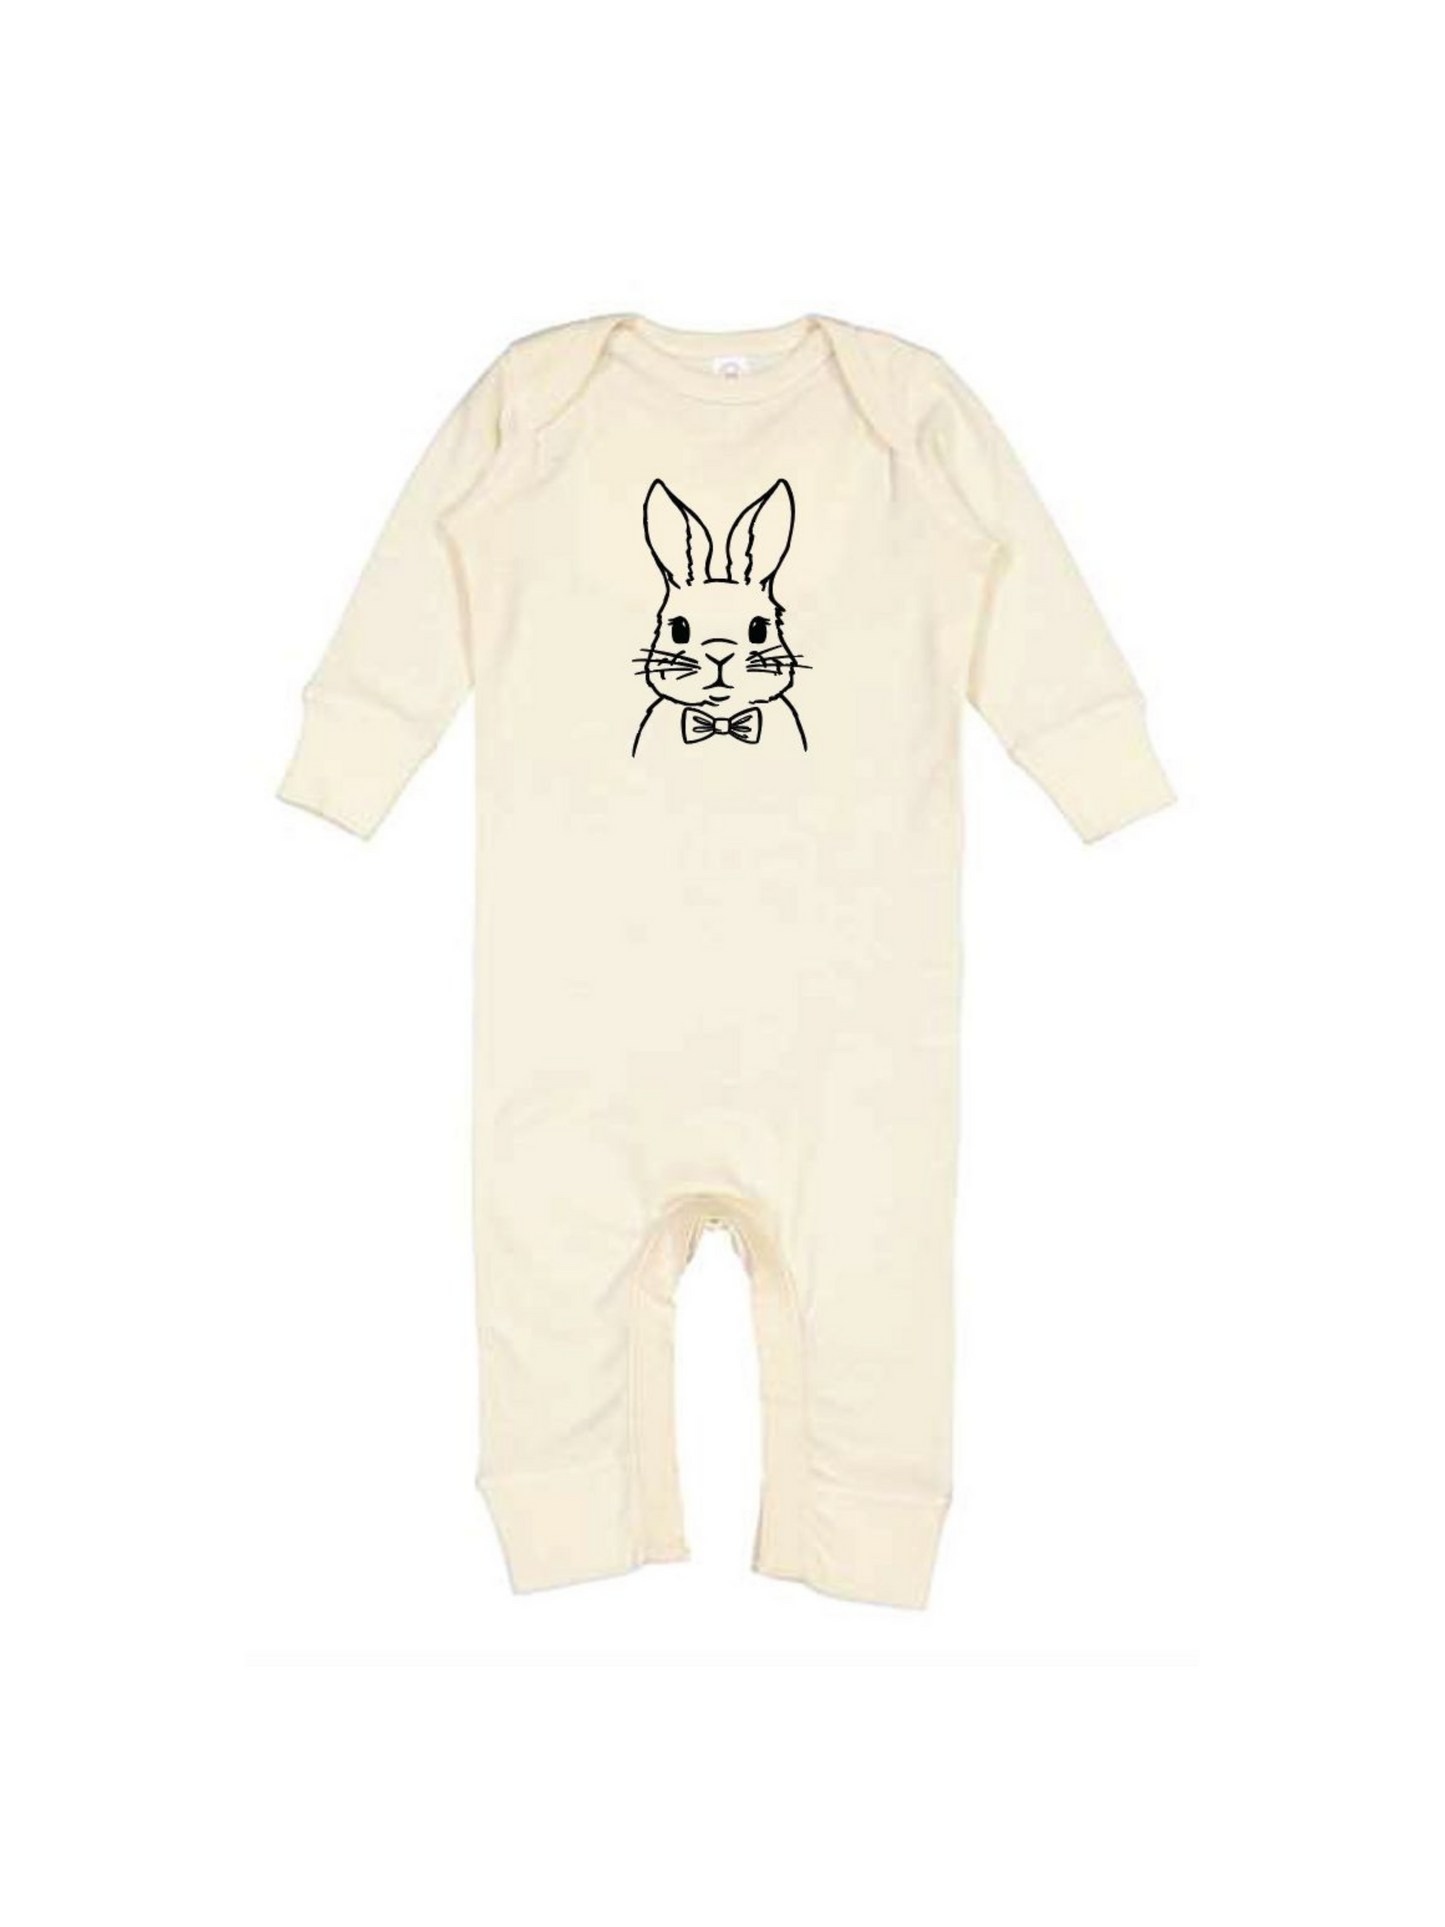 BOYS EASTER BUNNY ONE PIECE OUTFIT